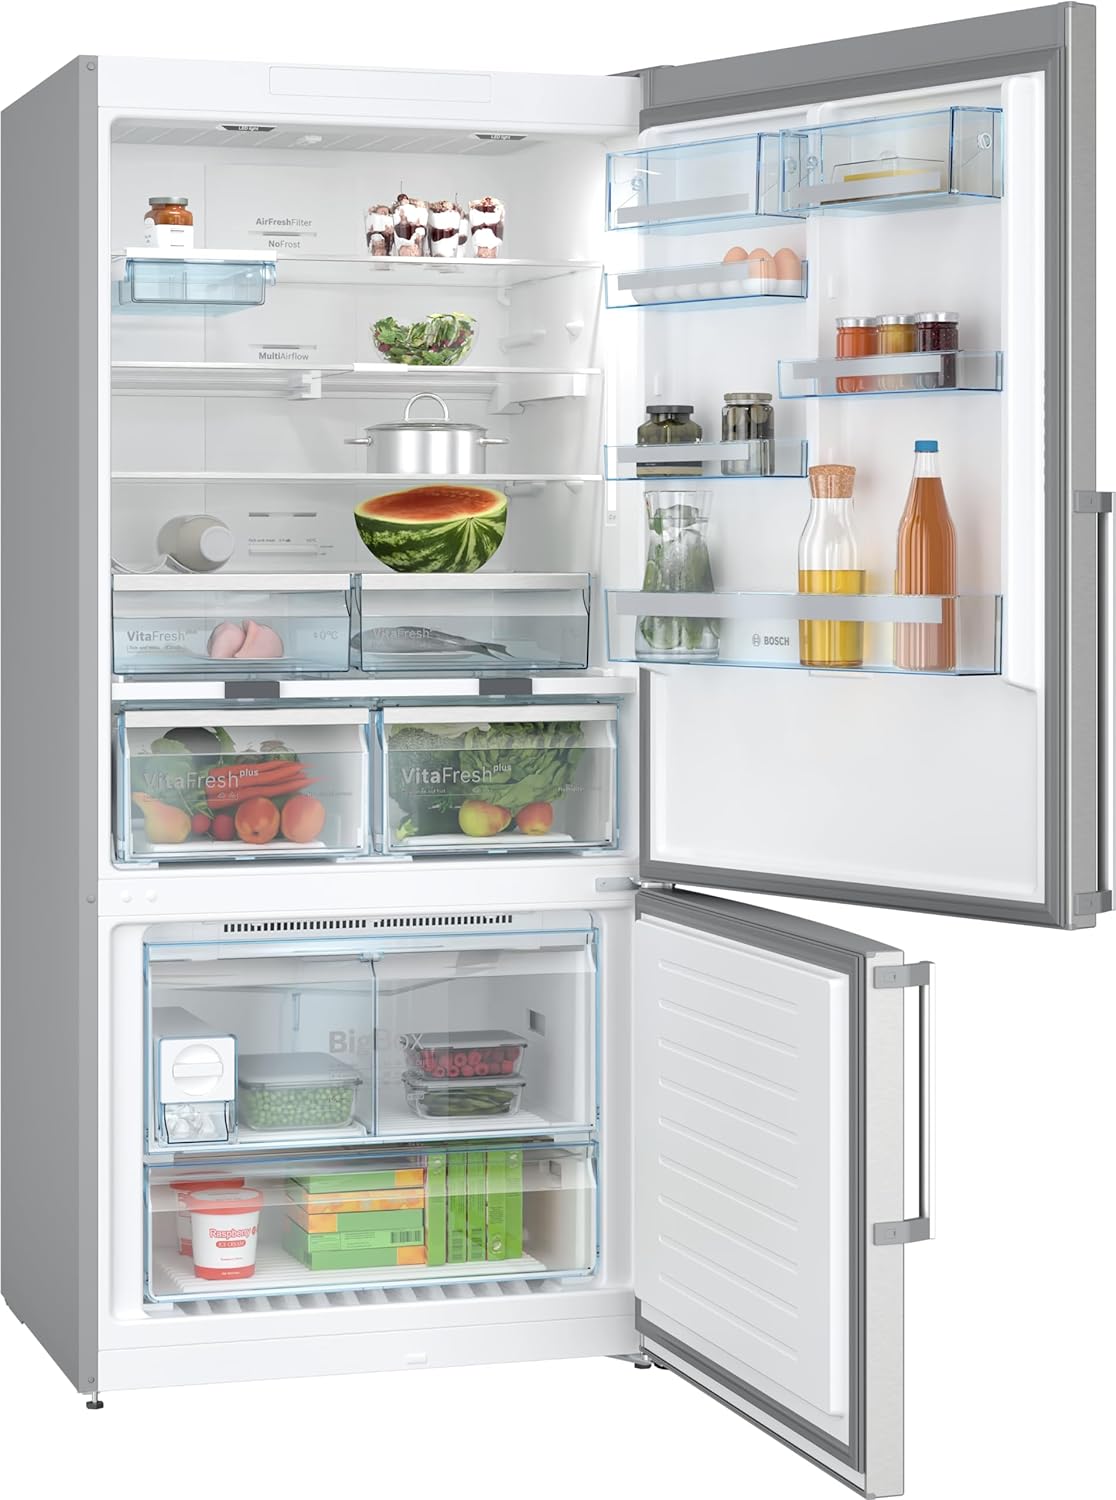 A refrigerator with the top and bottom part fully open